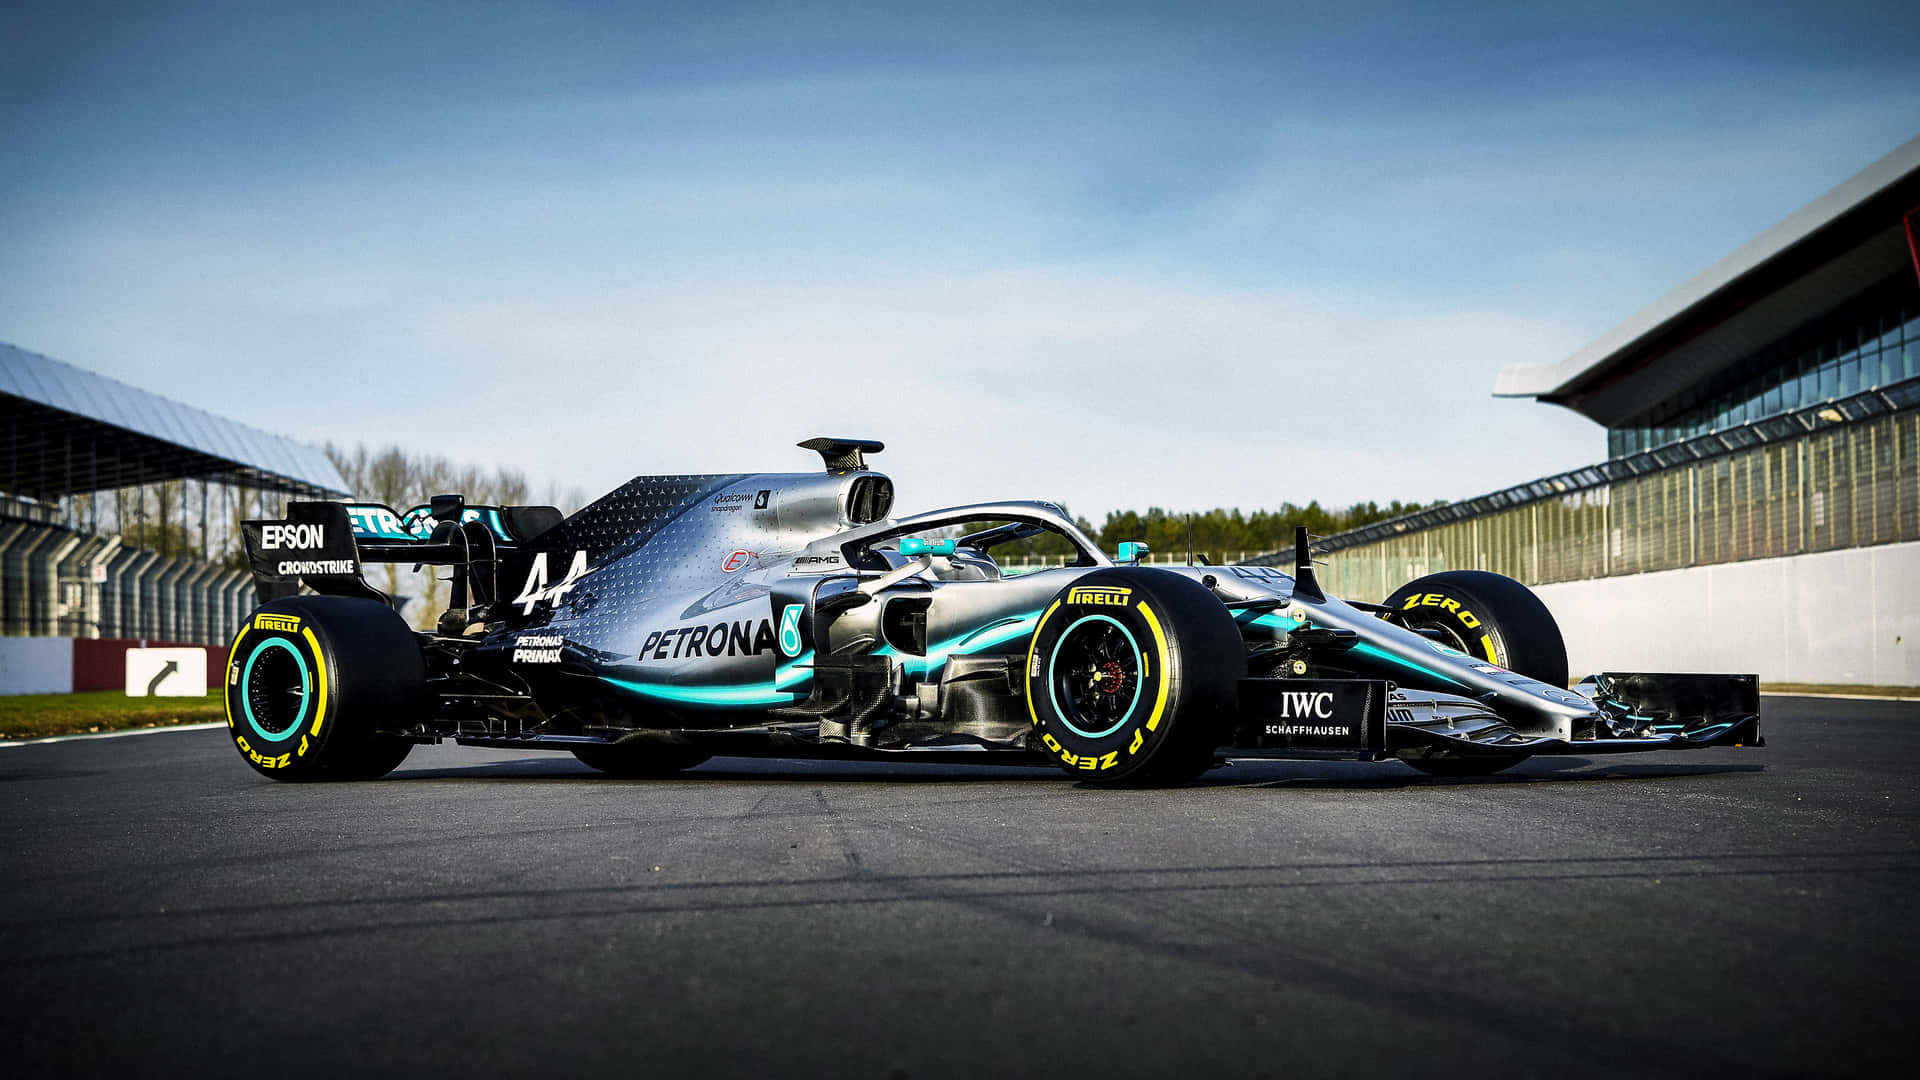 Mercedes W12 F1 Car On The Track Wallpaper